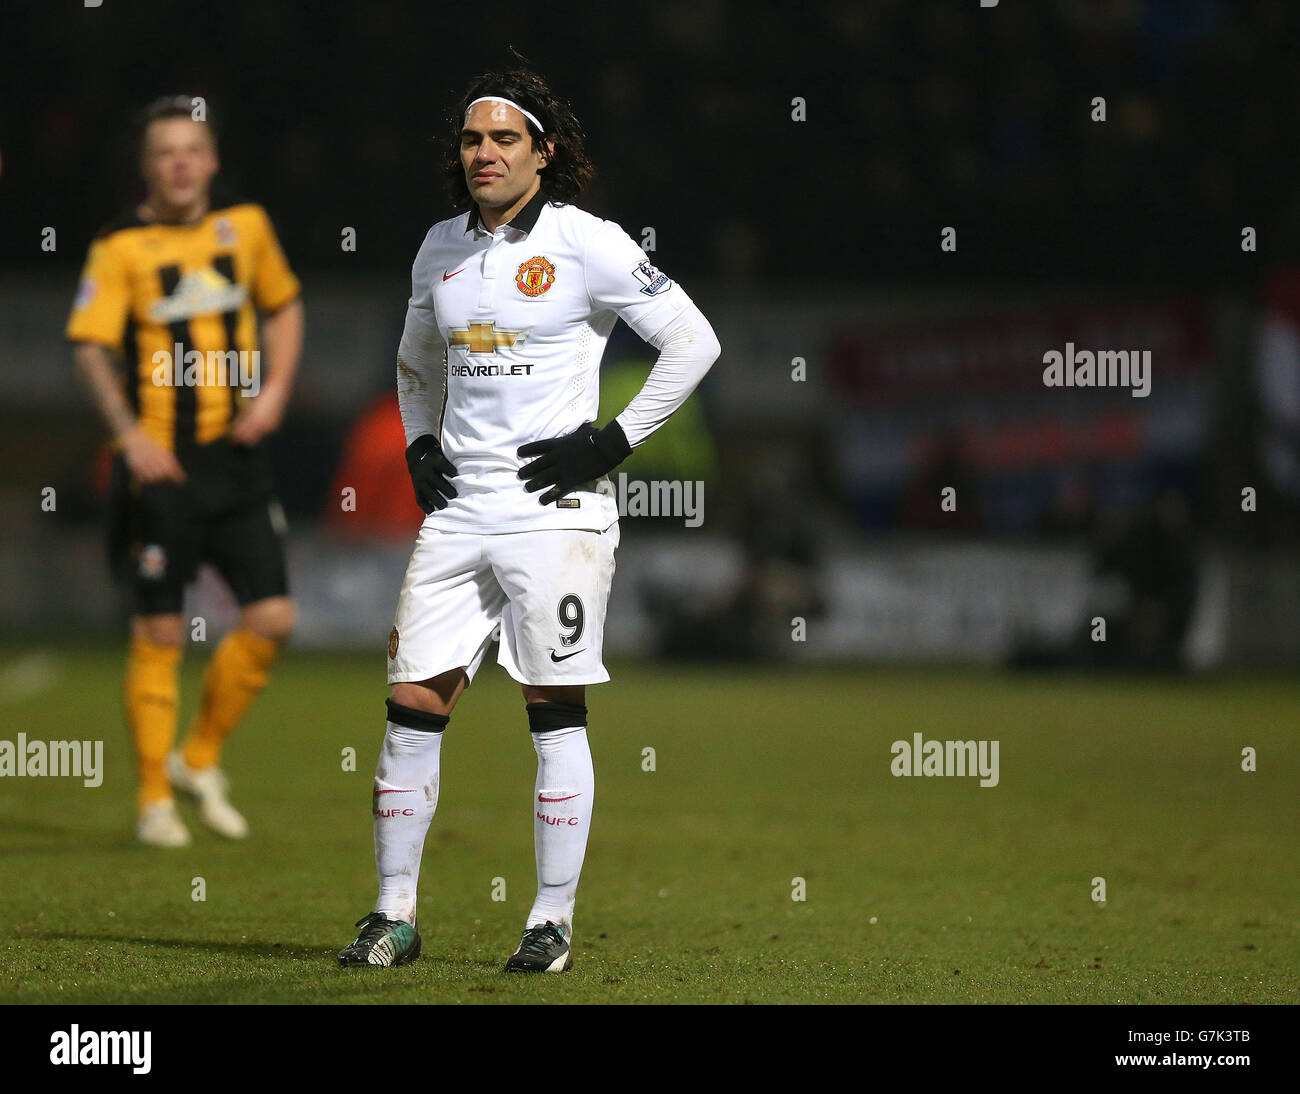 Soccer - FA Cup - Fourth Round - Cambridge United v Manchester United - The R Costings Abbey Stadium. Manchester United's Radamel Falcao reacts Stock Photo